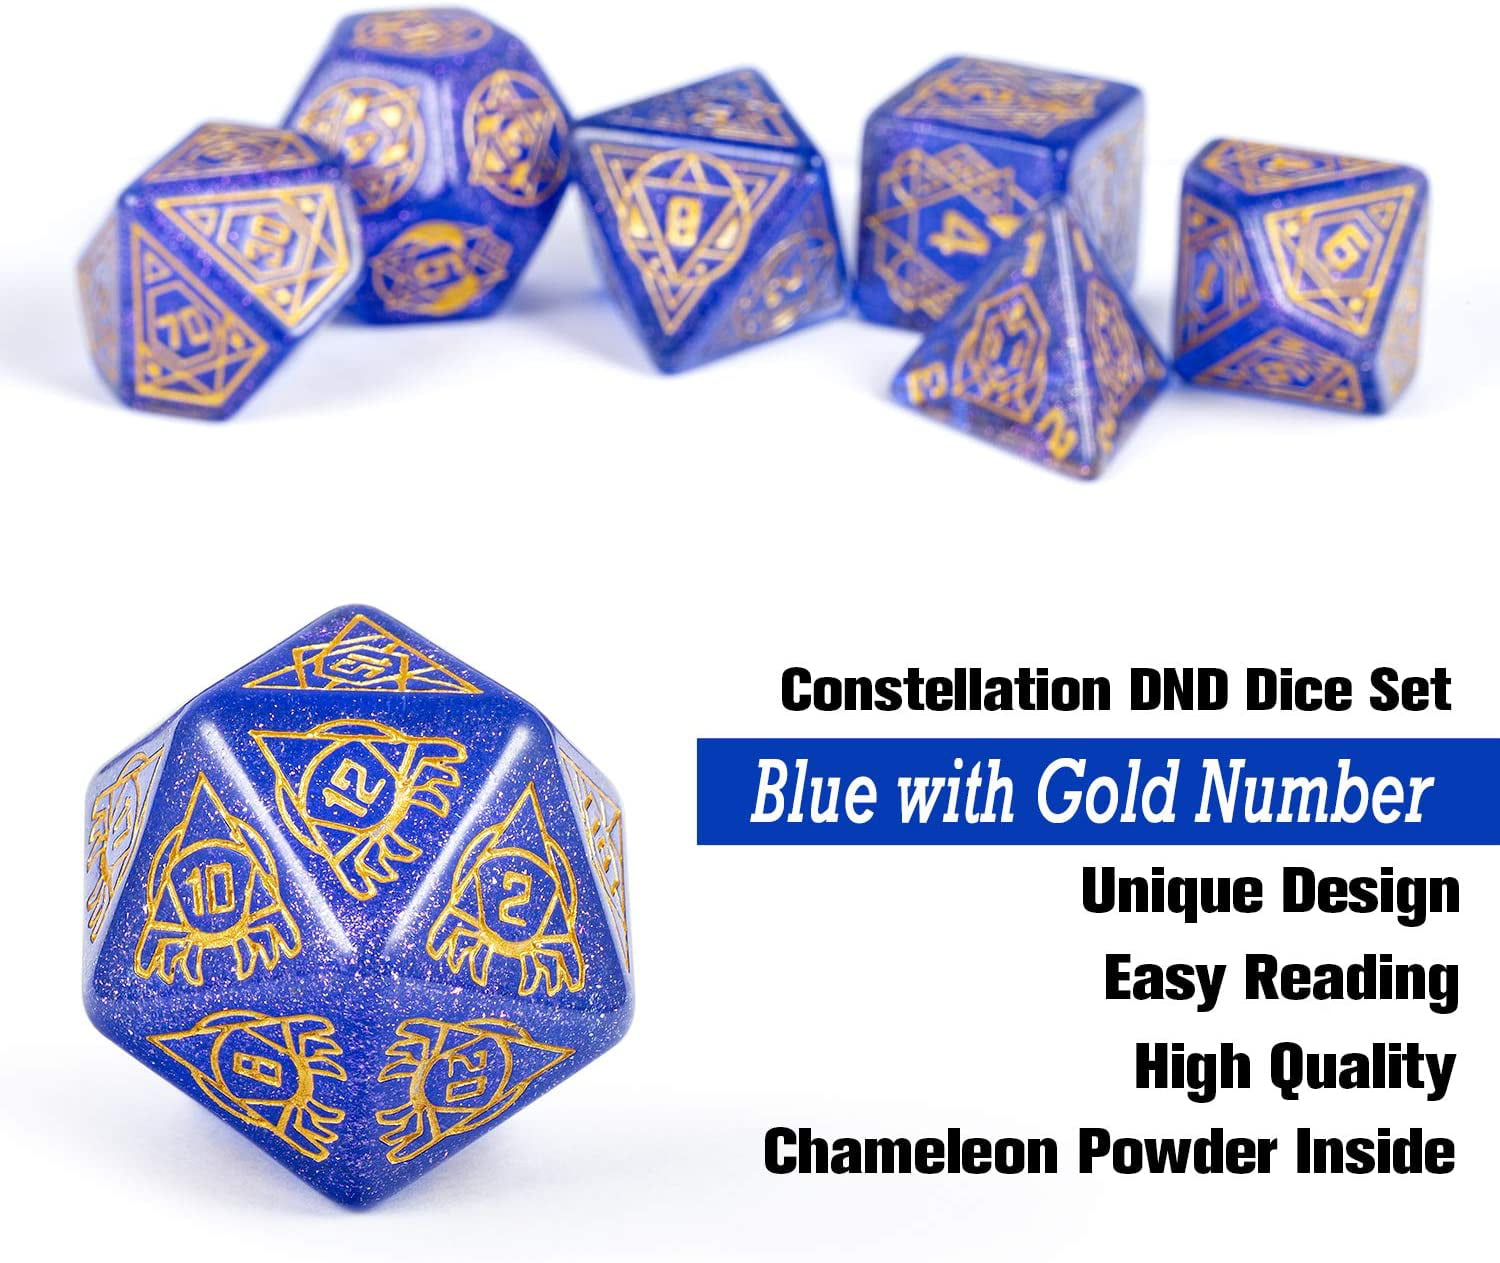 25mm Giant Polyhedral Dice Set D&D DNDND Constellation Patterns DND Dice with Metal Tin for Role Playing Game Dungeons and Dragons Black with Gold Number 